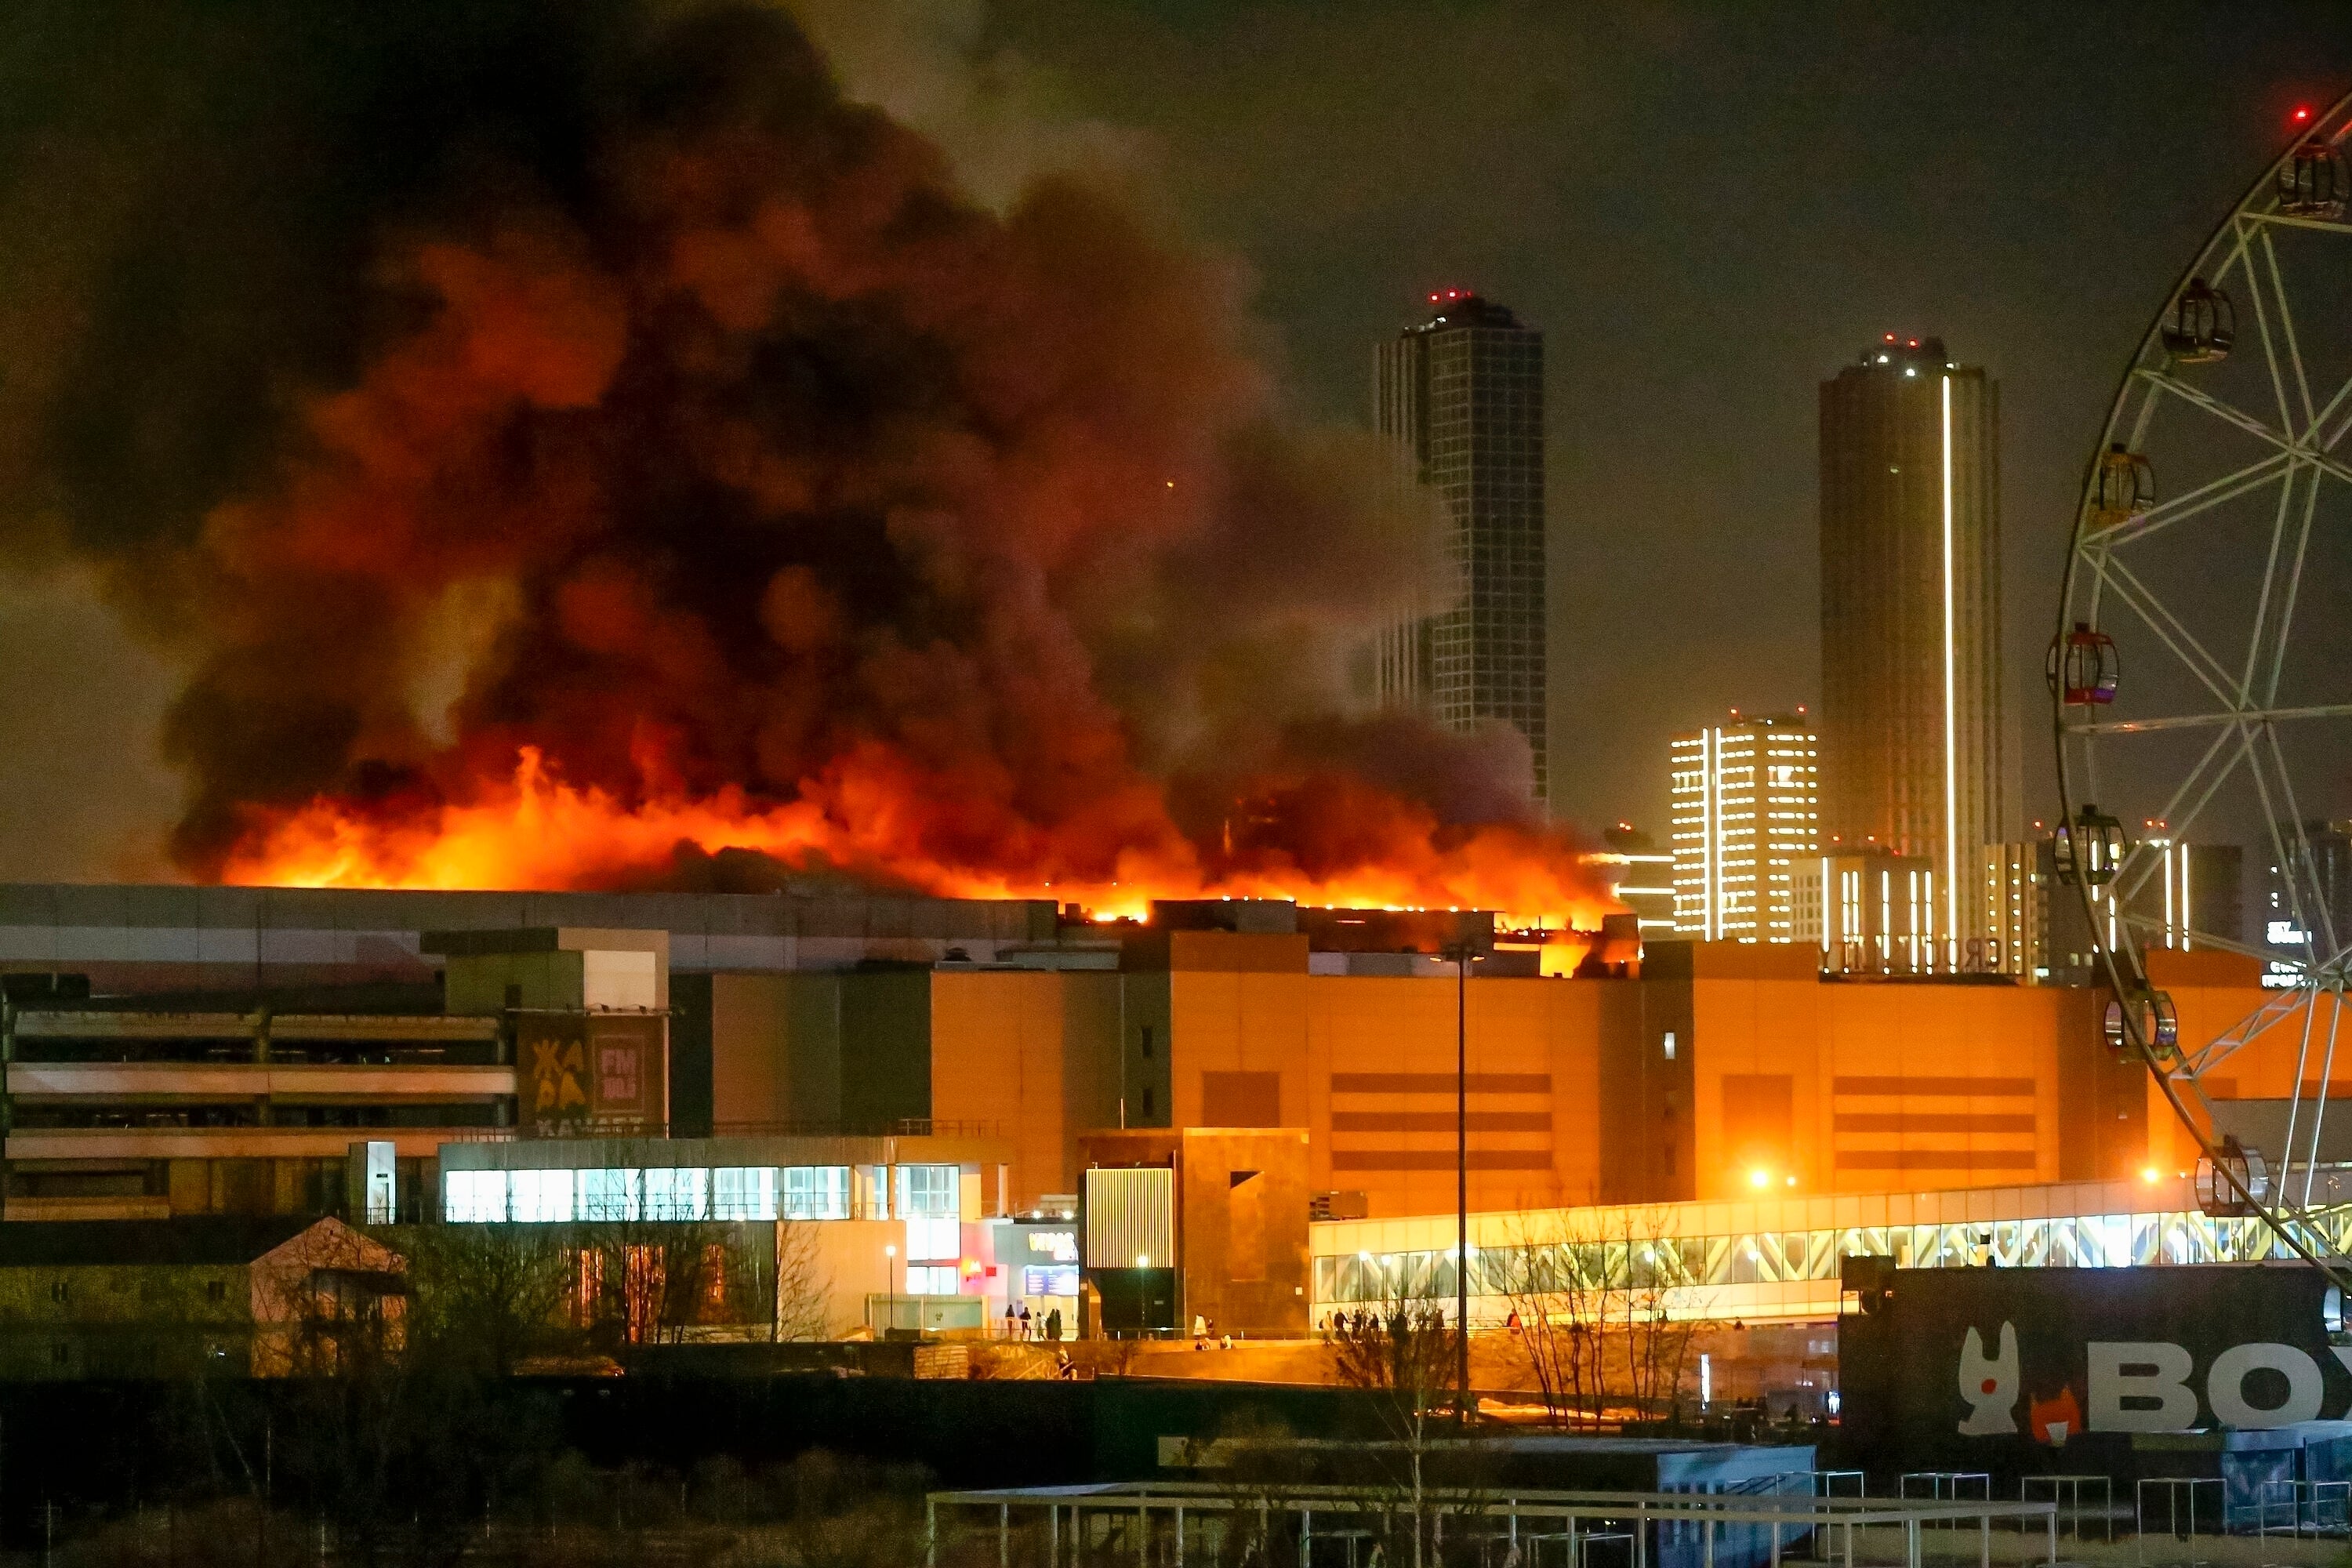 The huge blaze after an explosion on Friday night